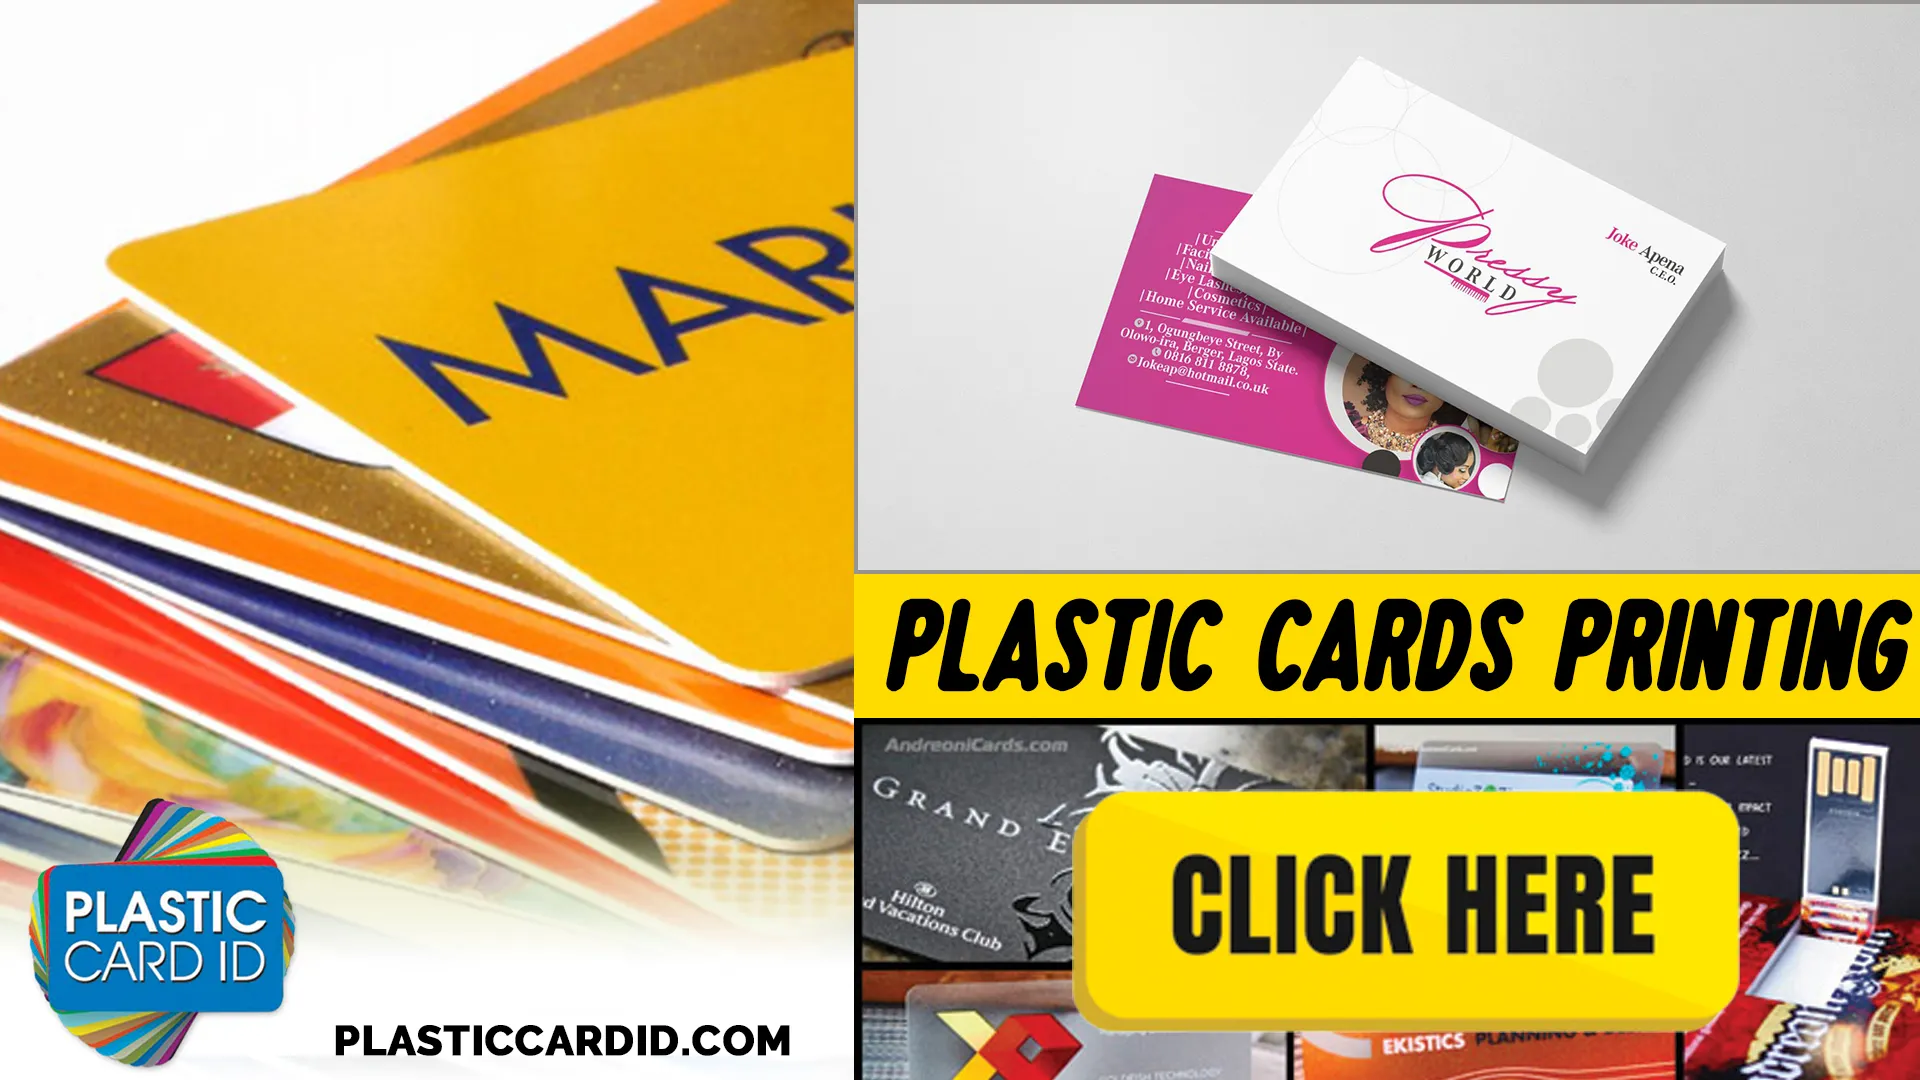 Welcome to Plastic Card ID




: Where Customer Feedback Shapes Our Card Services 